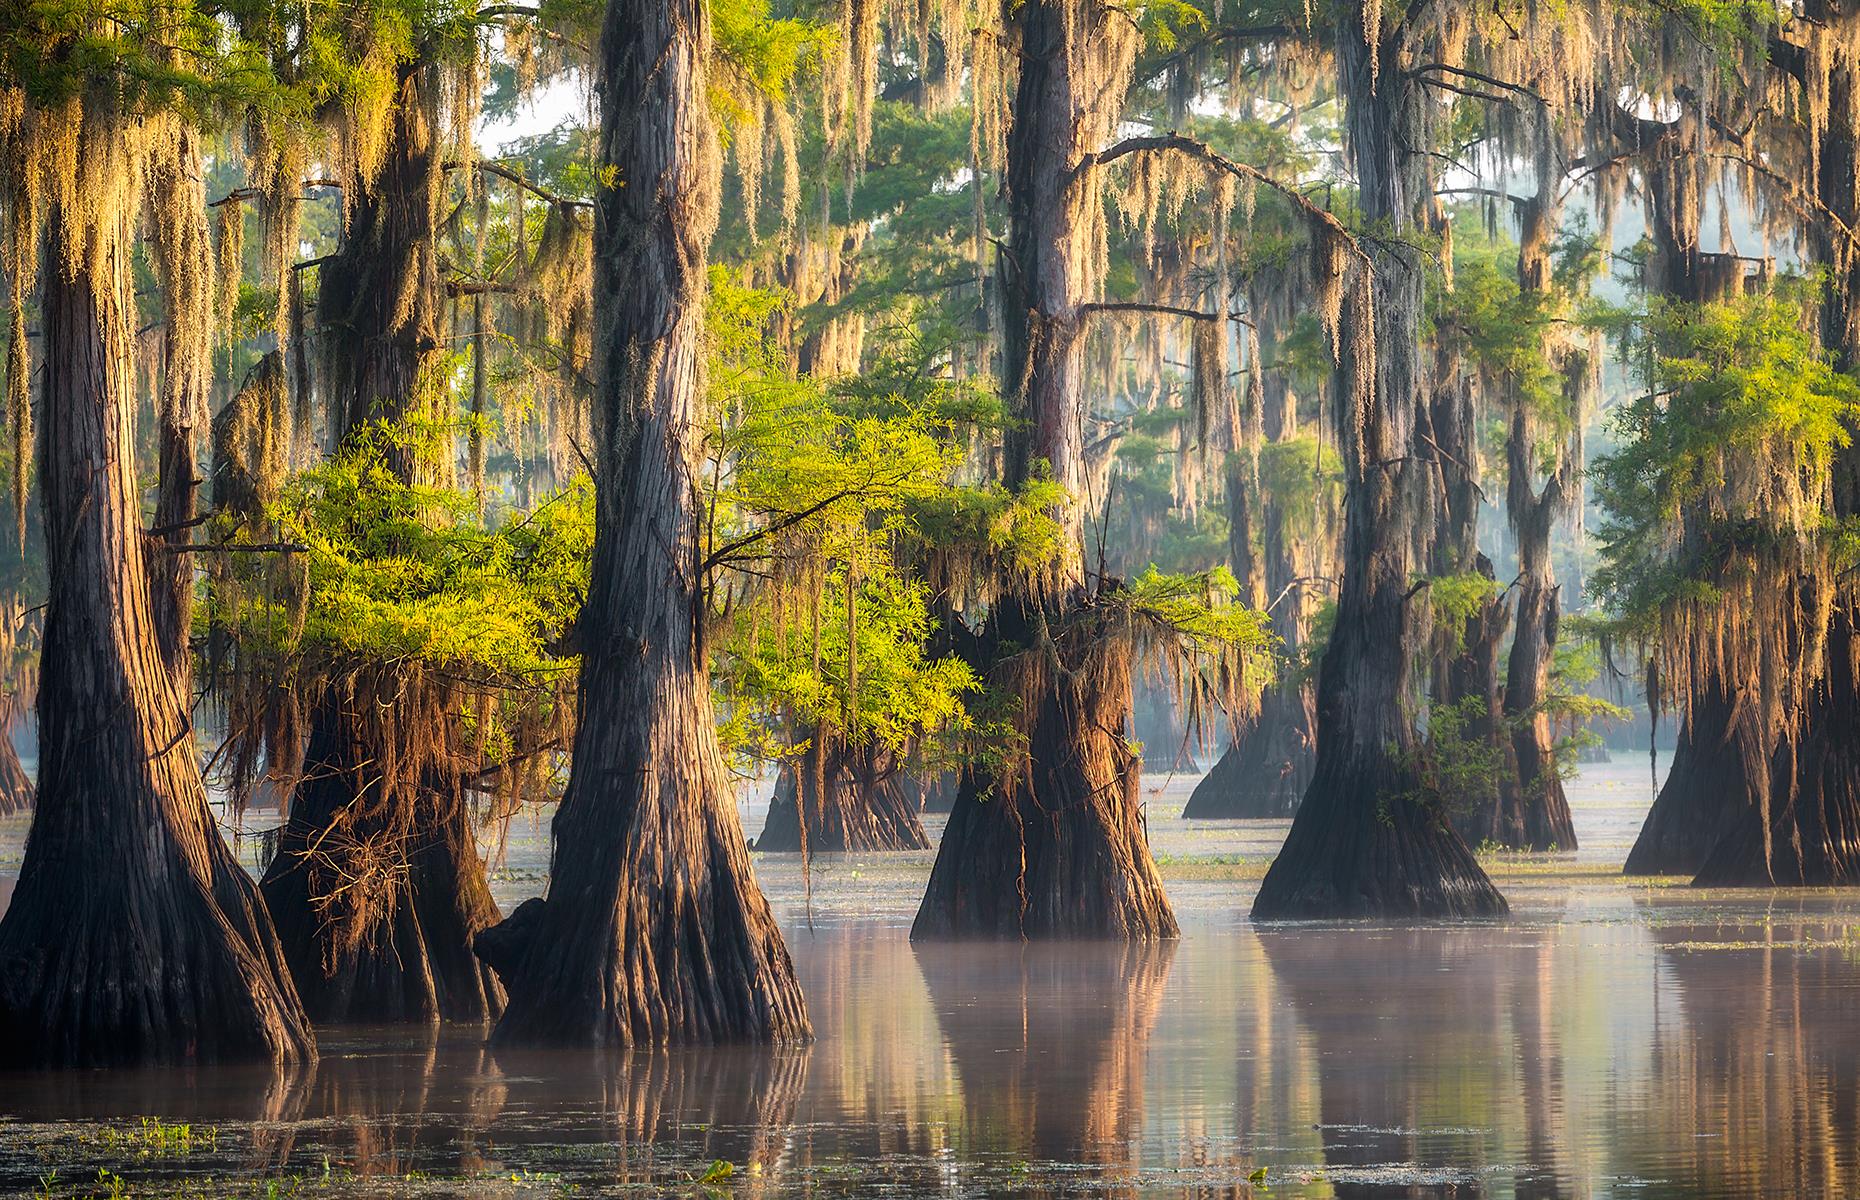 Slide 3 of 41: This swampy lake that lies on the border of Texas and Louisiana is probably one of the moodiest natural wonders on this list. Spanish moss drips from the cypress trees, whose broad, knotted trunks are submerged in the dark, mysterious water. Alligators can sometimes be found basking on logs and the lake's slightly spooky ambiance is perfect for slow paddling in a kayak or canoe. These are America's most stunning lakes.